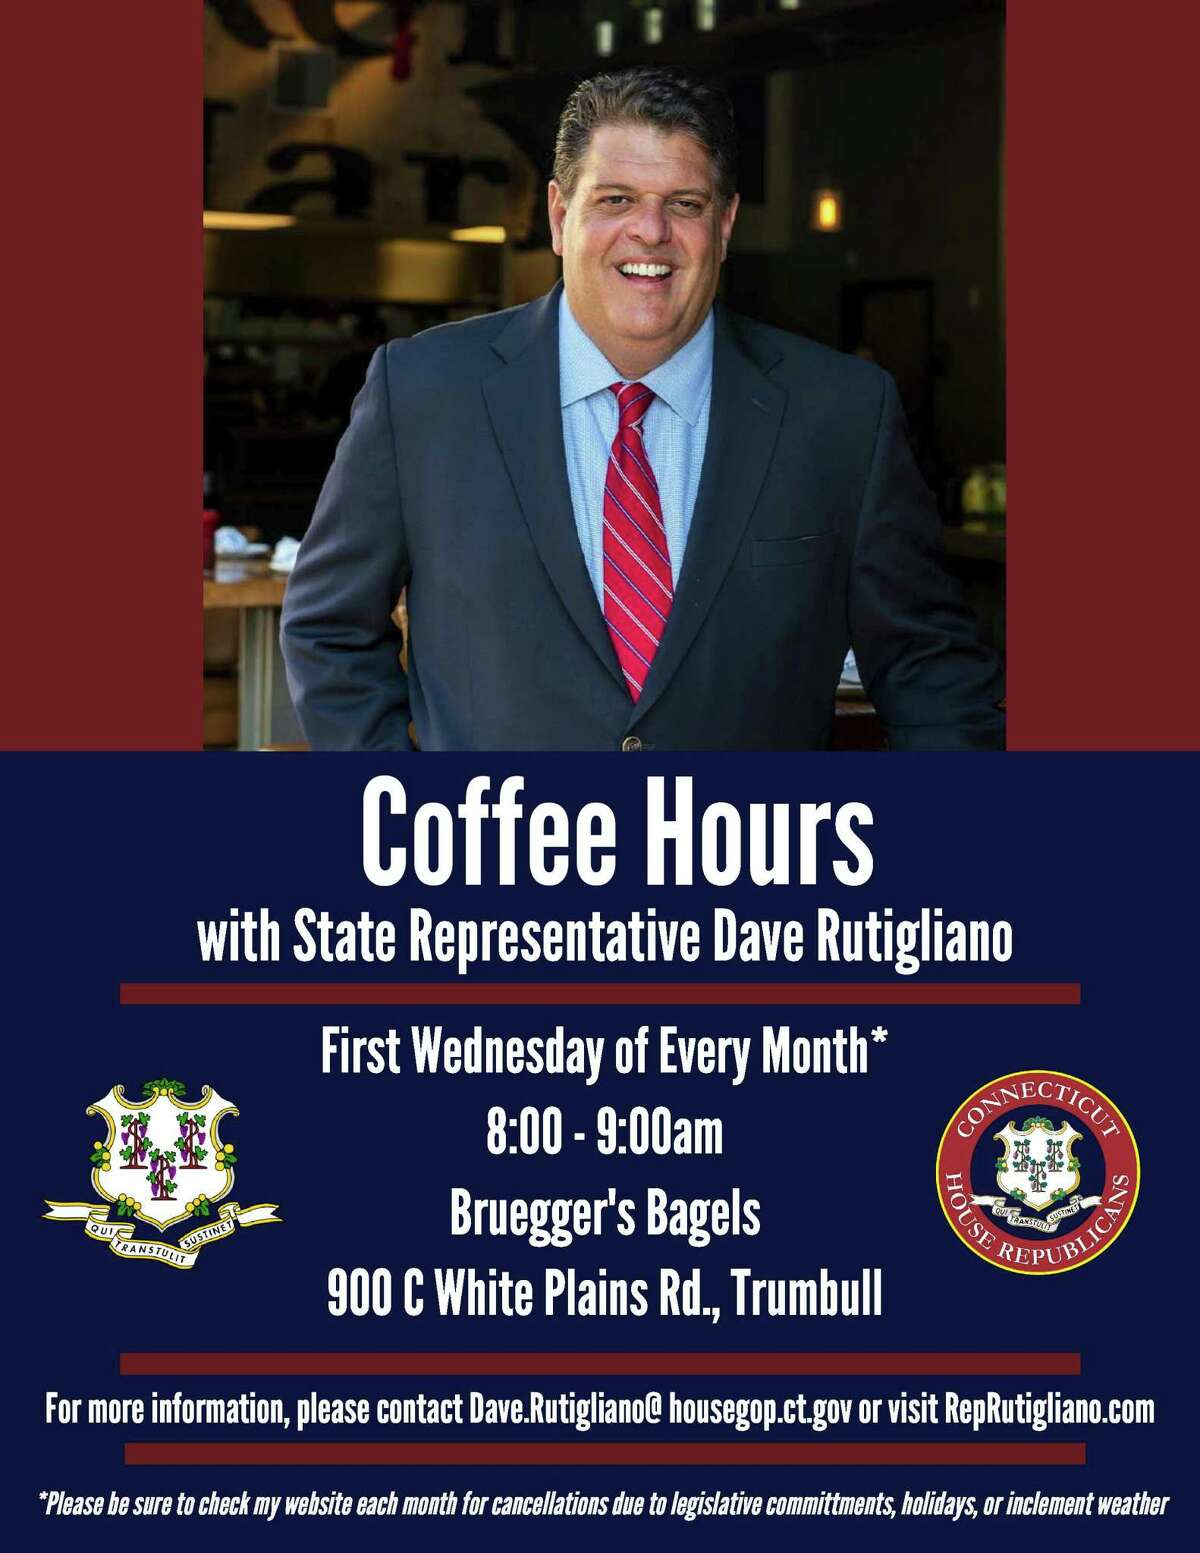 State Rep. David Rutigliano (R-123) will host a coffee hour at Bruegger's Bagels the first Wednesday of every month.